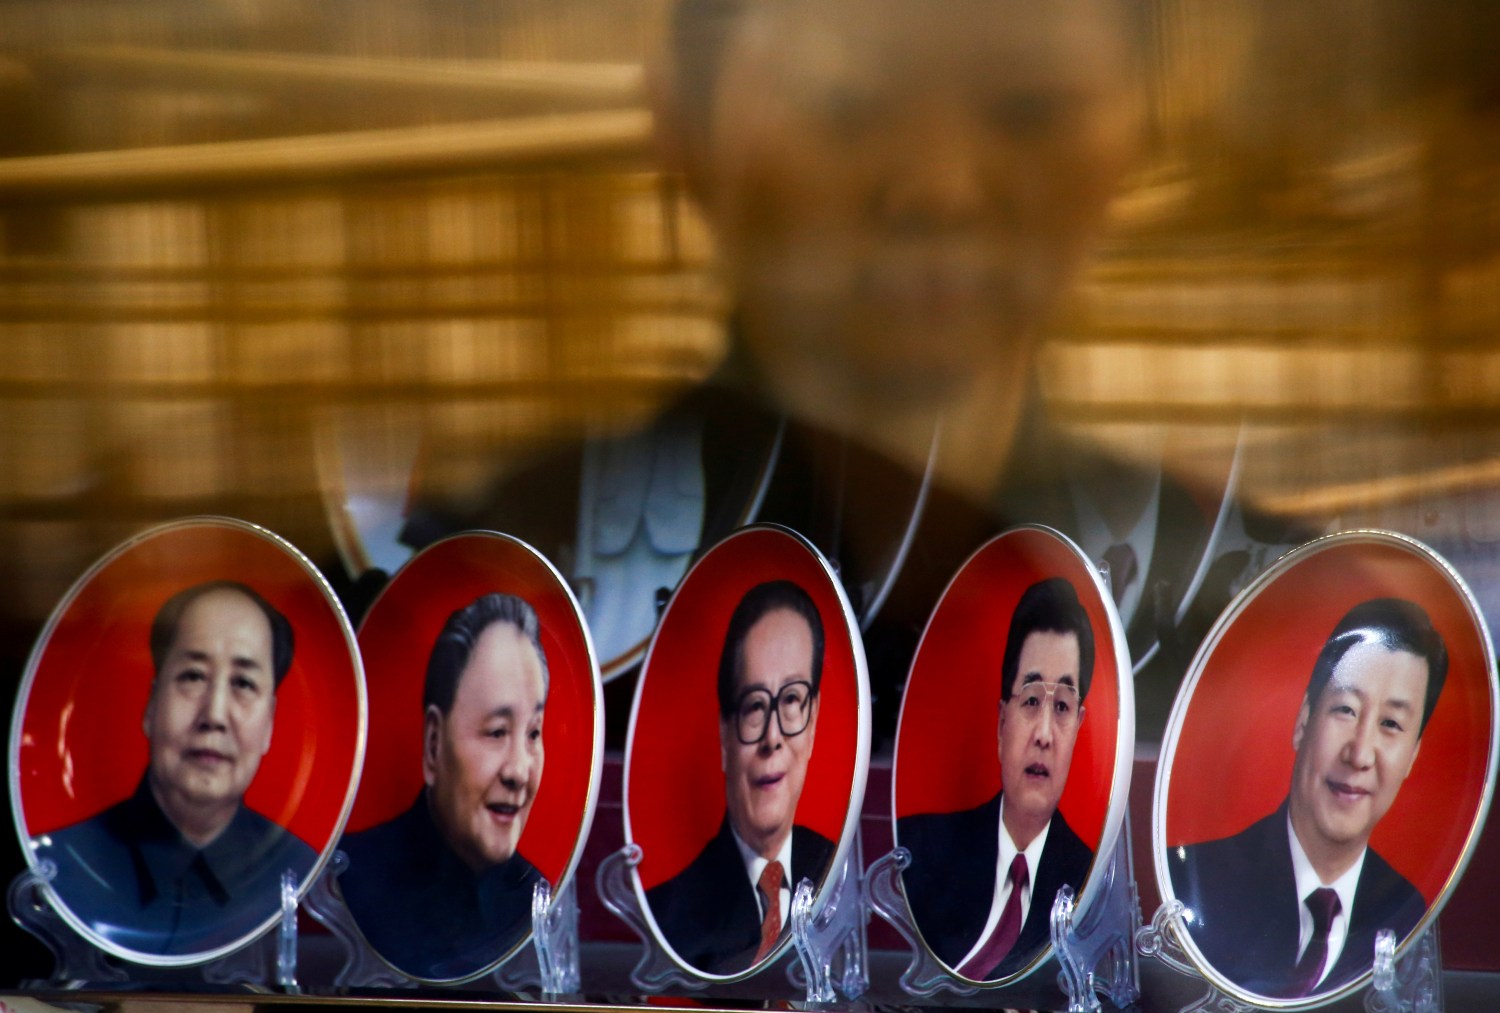 A woman is reflected in a shop window as she looks at souvenir plates with portraits of former Chinese leaders Mao Zedong, Deng Xiaoping, Jiang Zemin, Hu Jintao and current President Xi Jinping